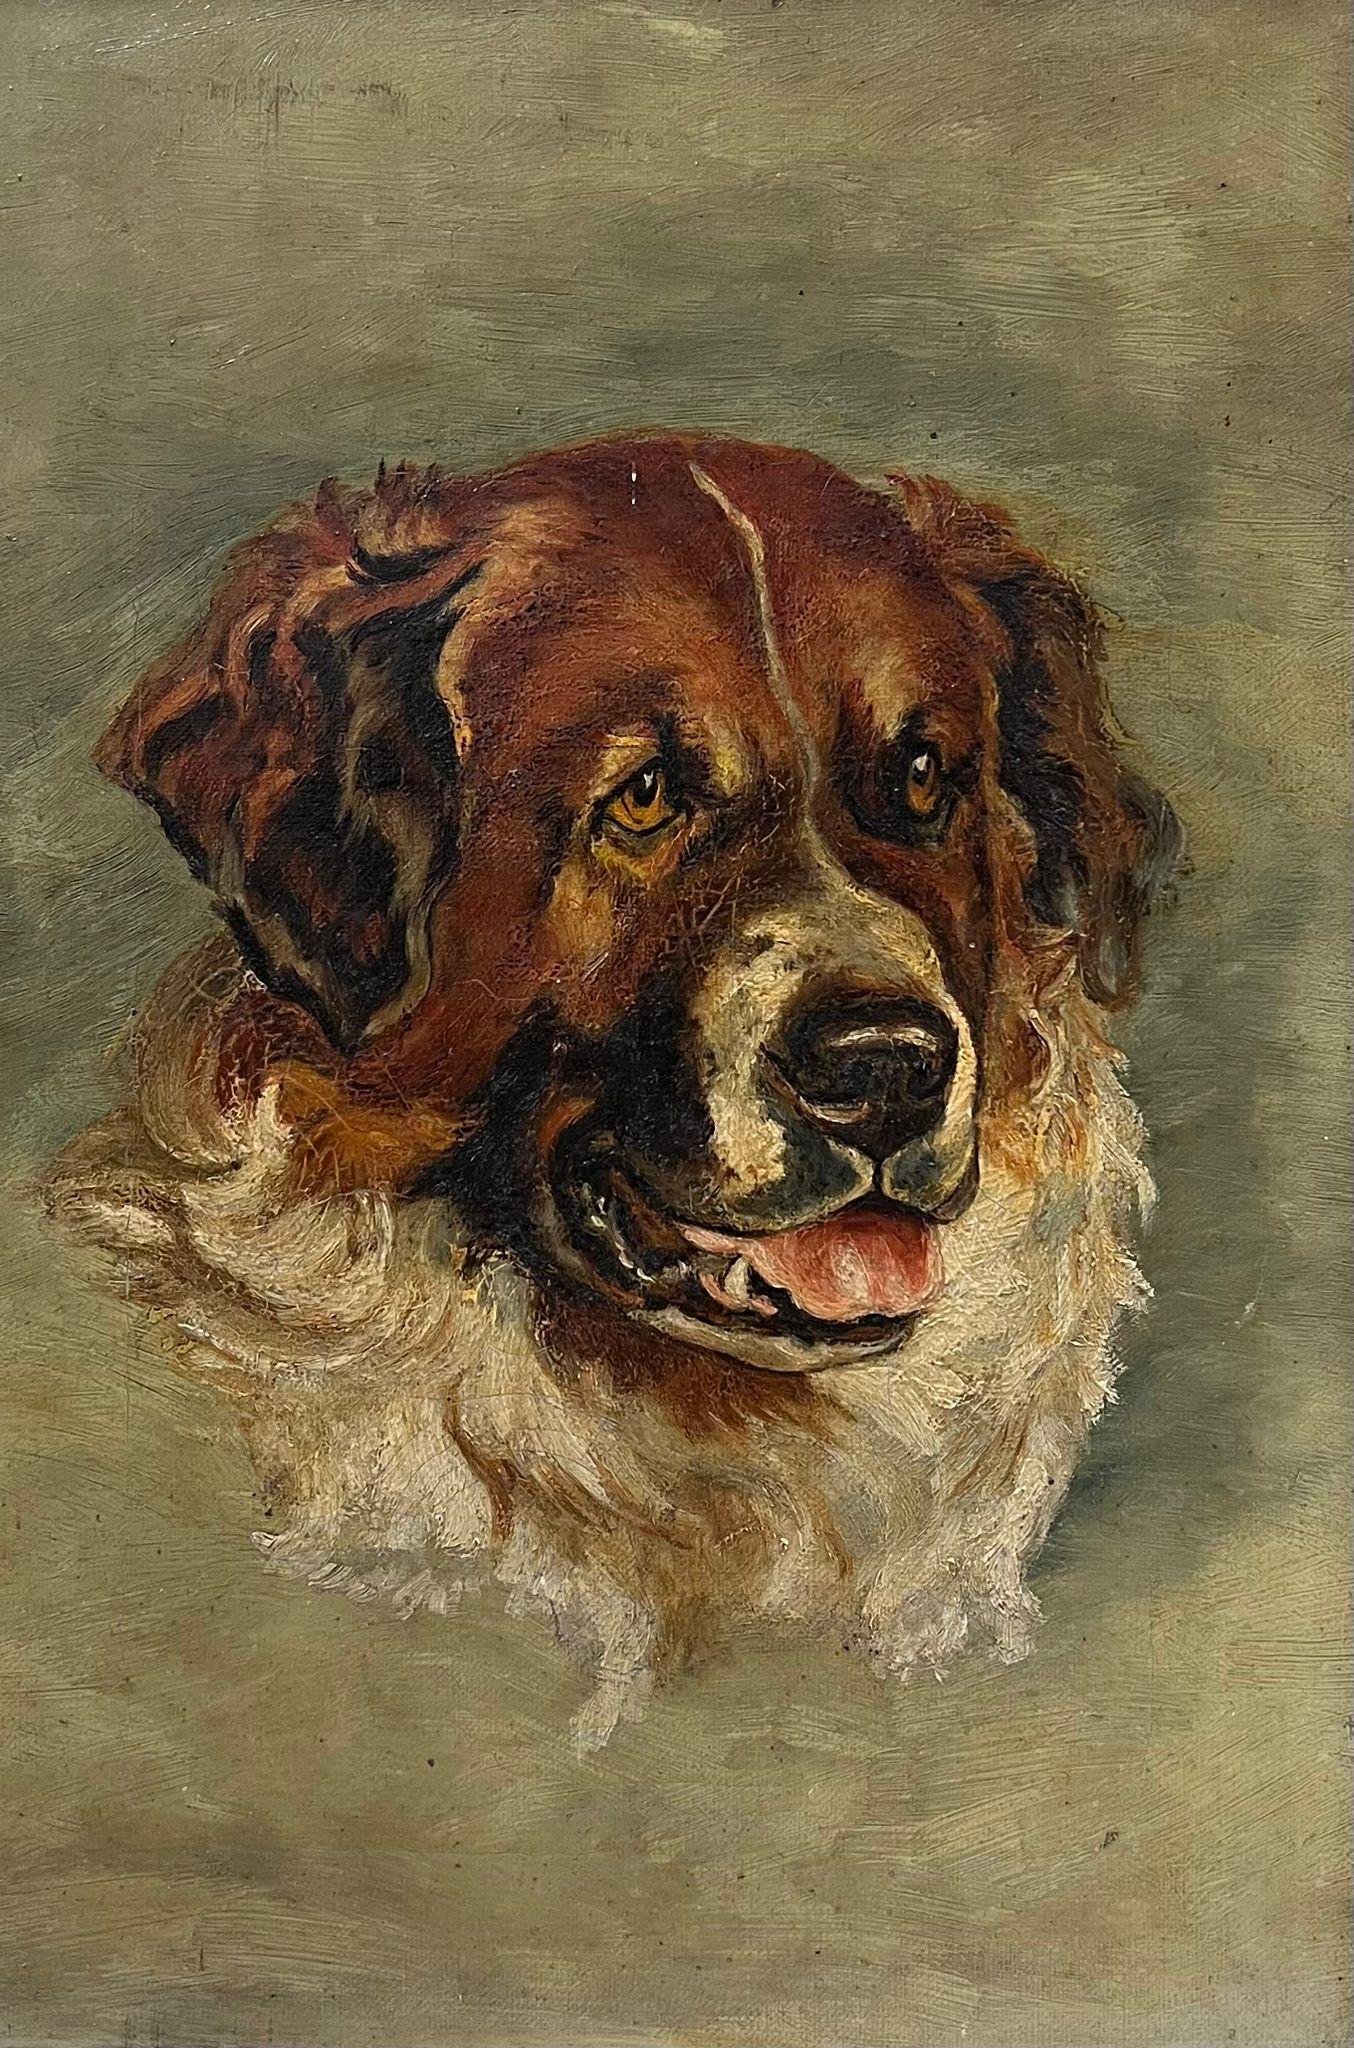 Head Portrait of a Dog St. Bernard? Antique English Oil Painting on Canvas - Brown Portrait Painting by Antique English artist